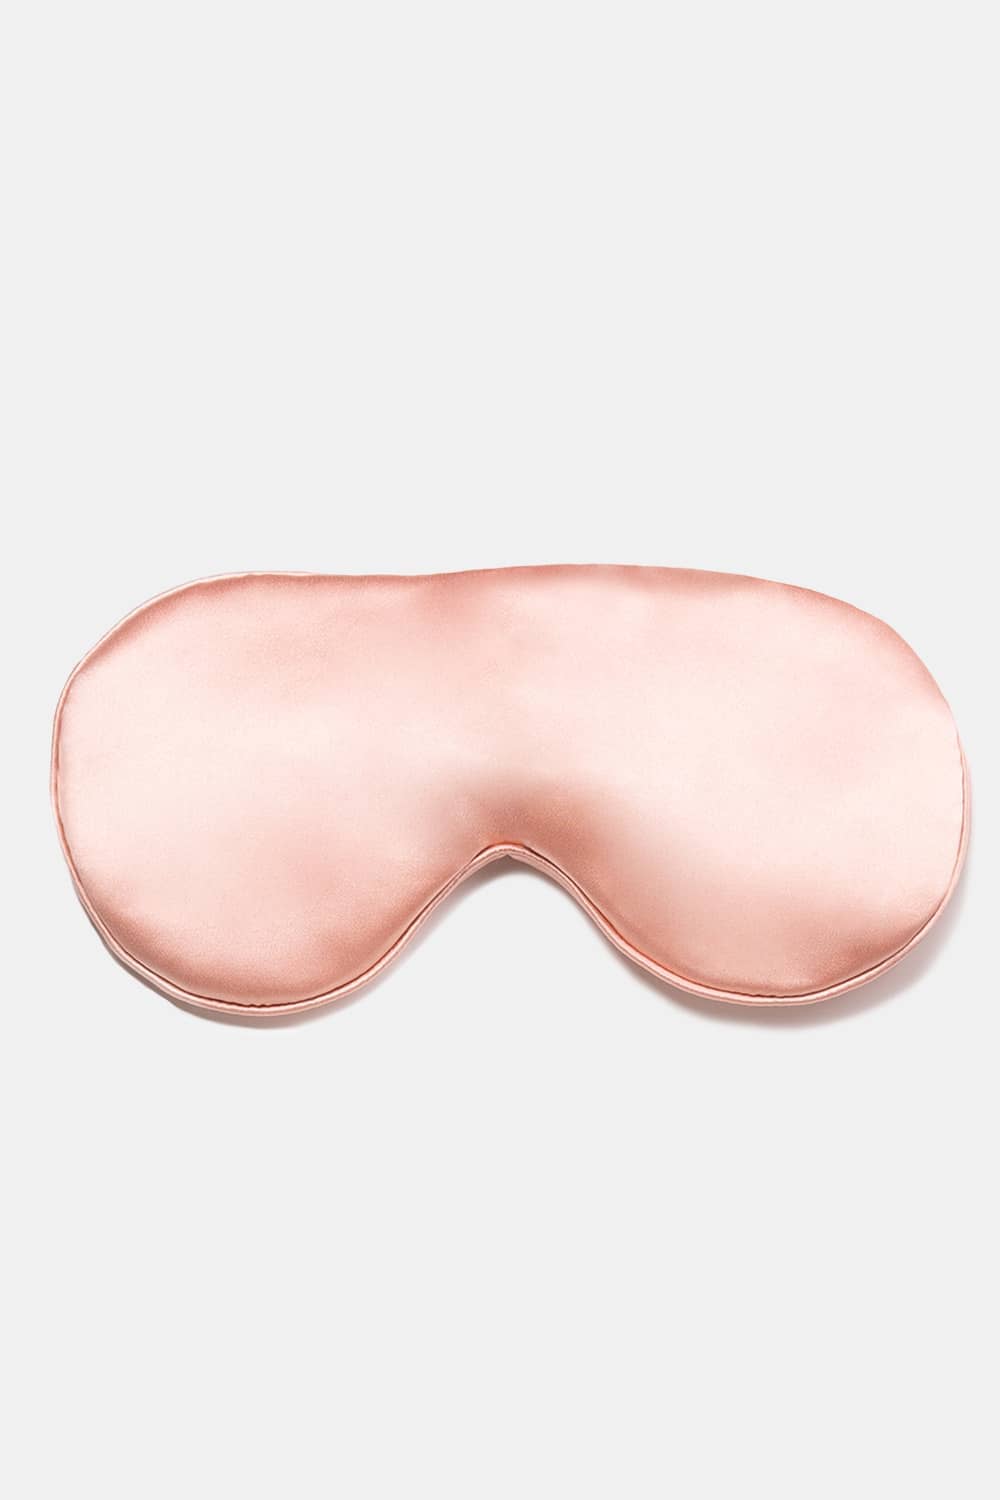 100% Mulberry Silk Therapeutic Sleep Mask - 25 Momme Beauty>Masks Fishers Finery Pink